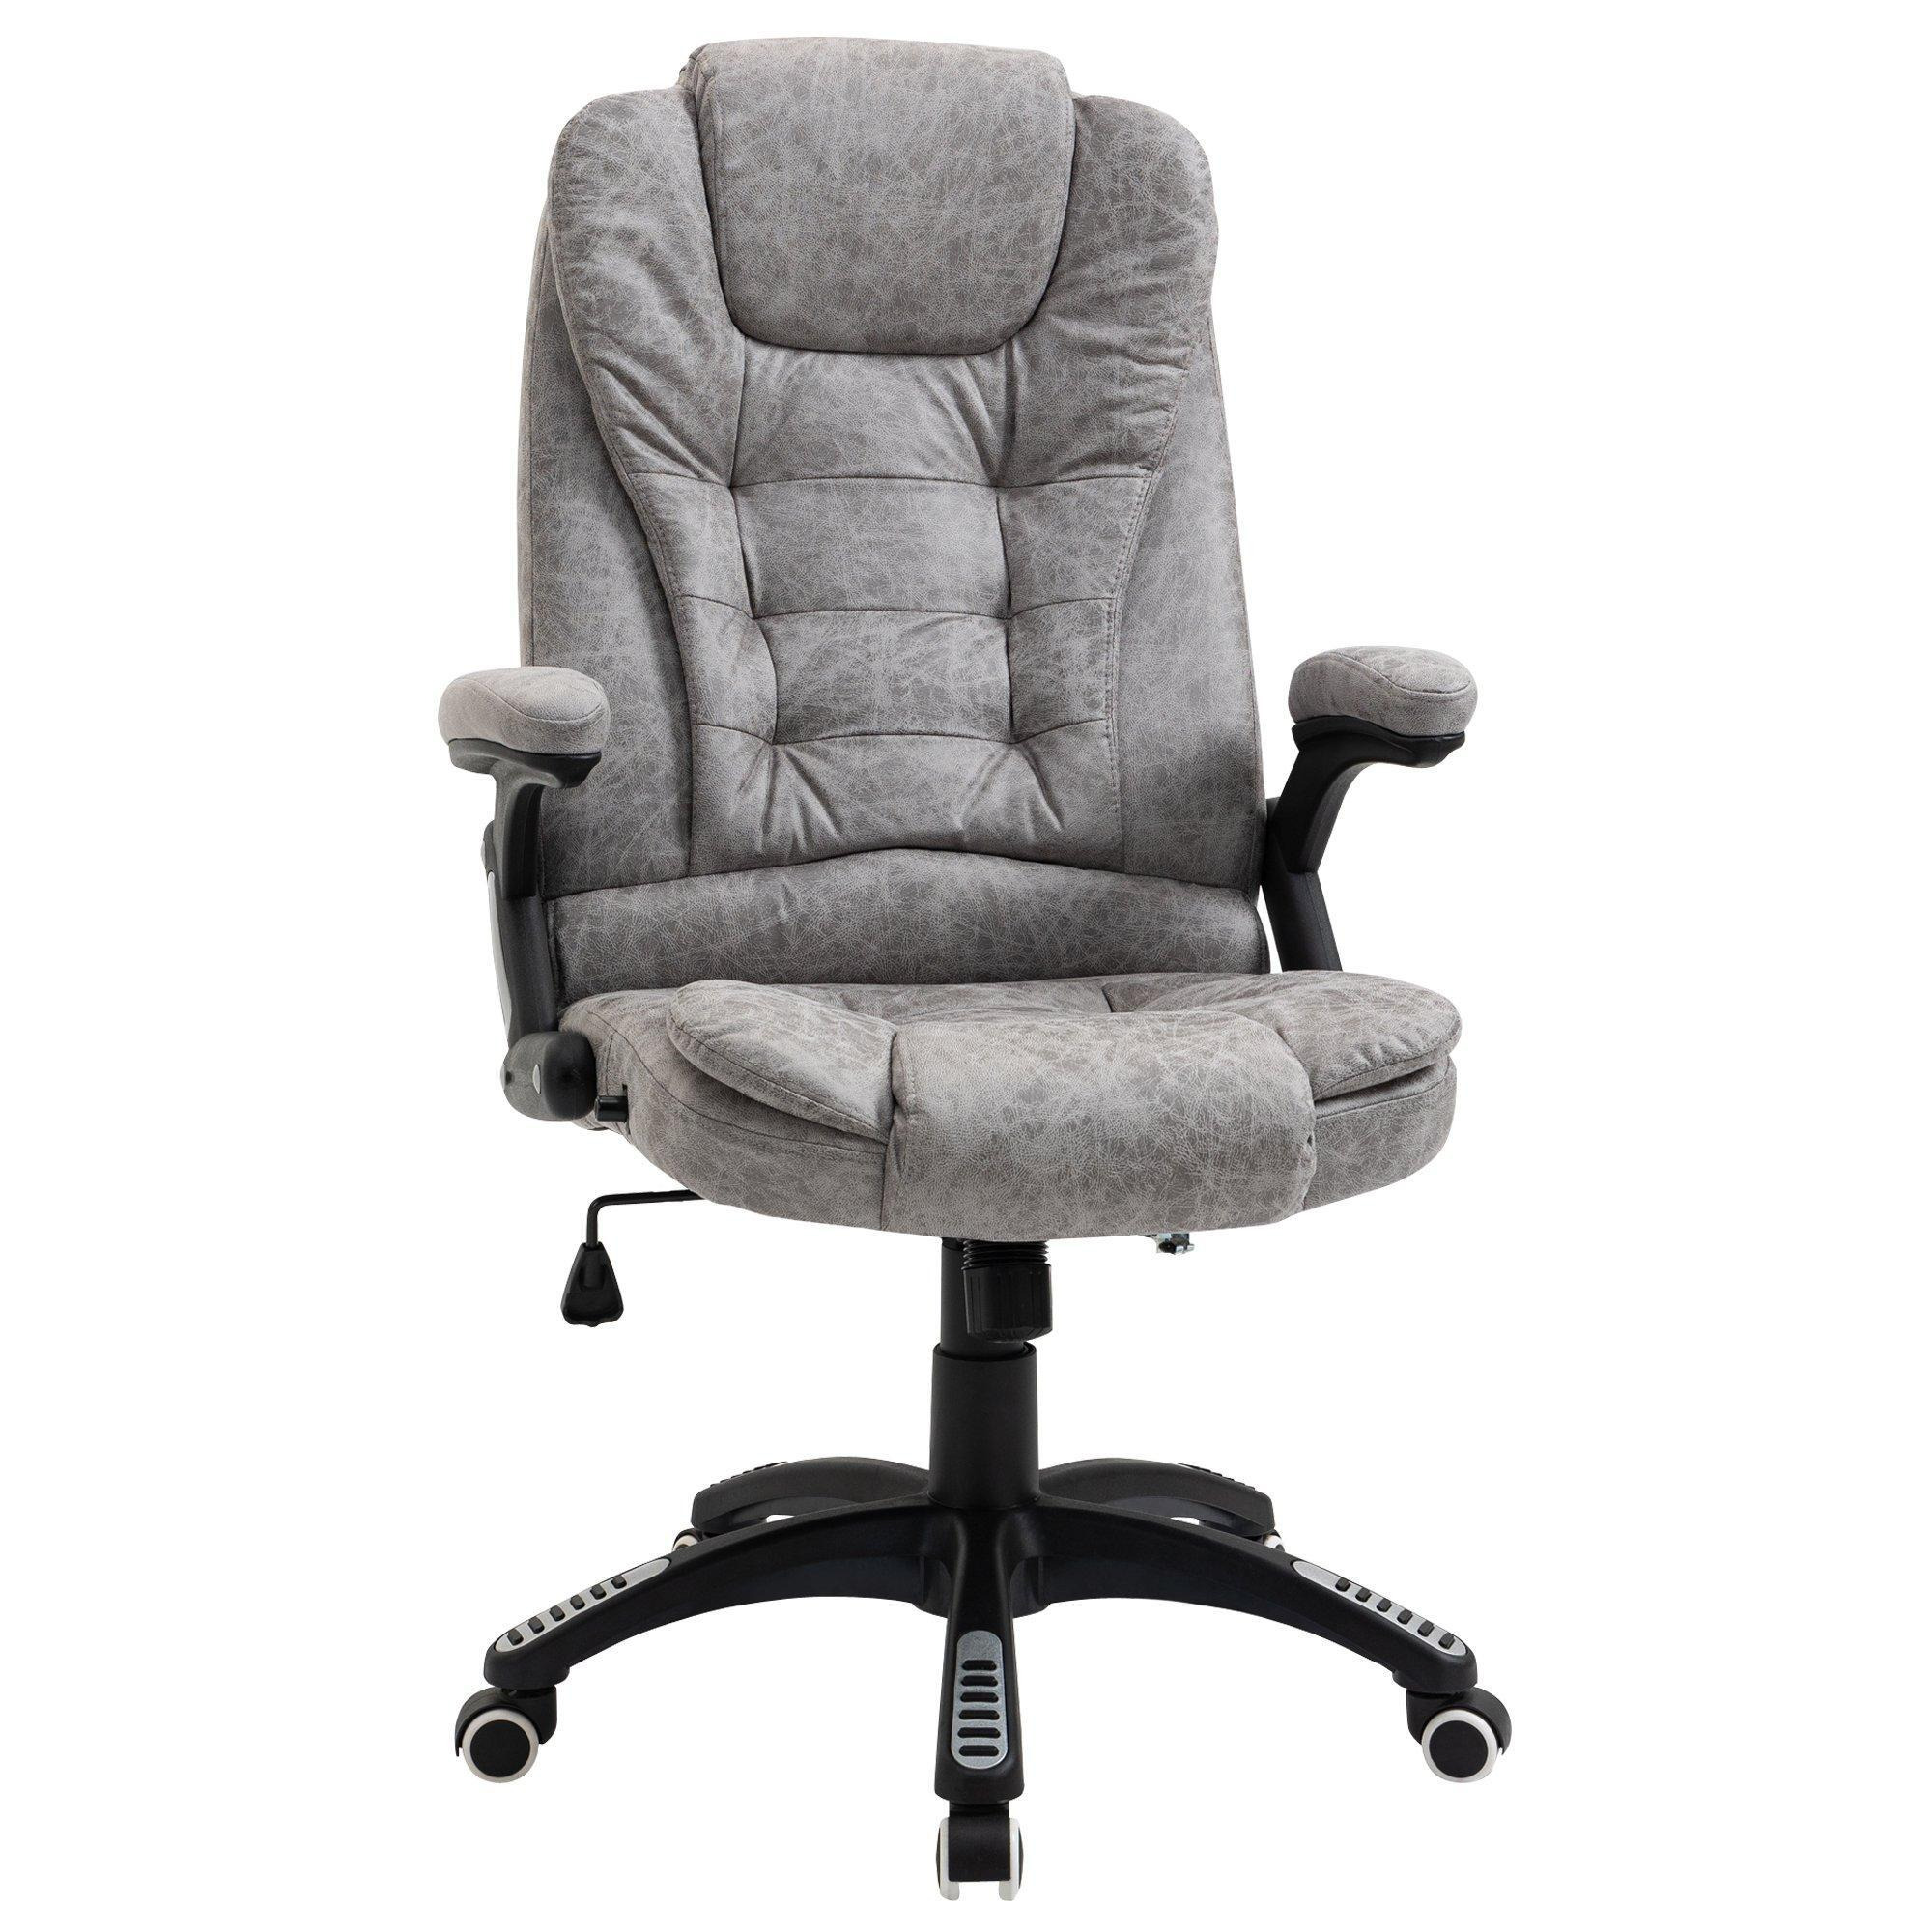 High Back Home Office Chair Computer Desk Chair with Arms Swivel Wheels - image 1